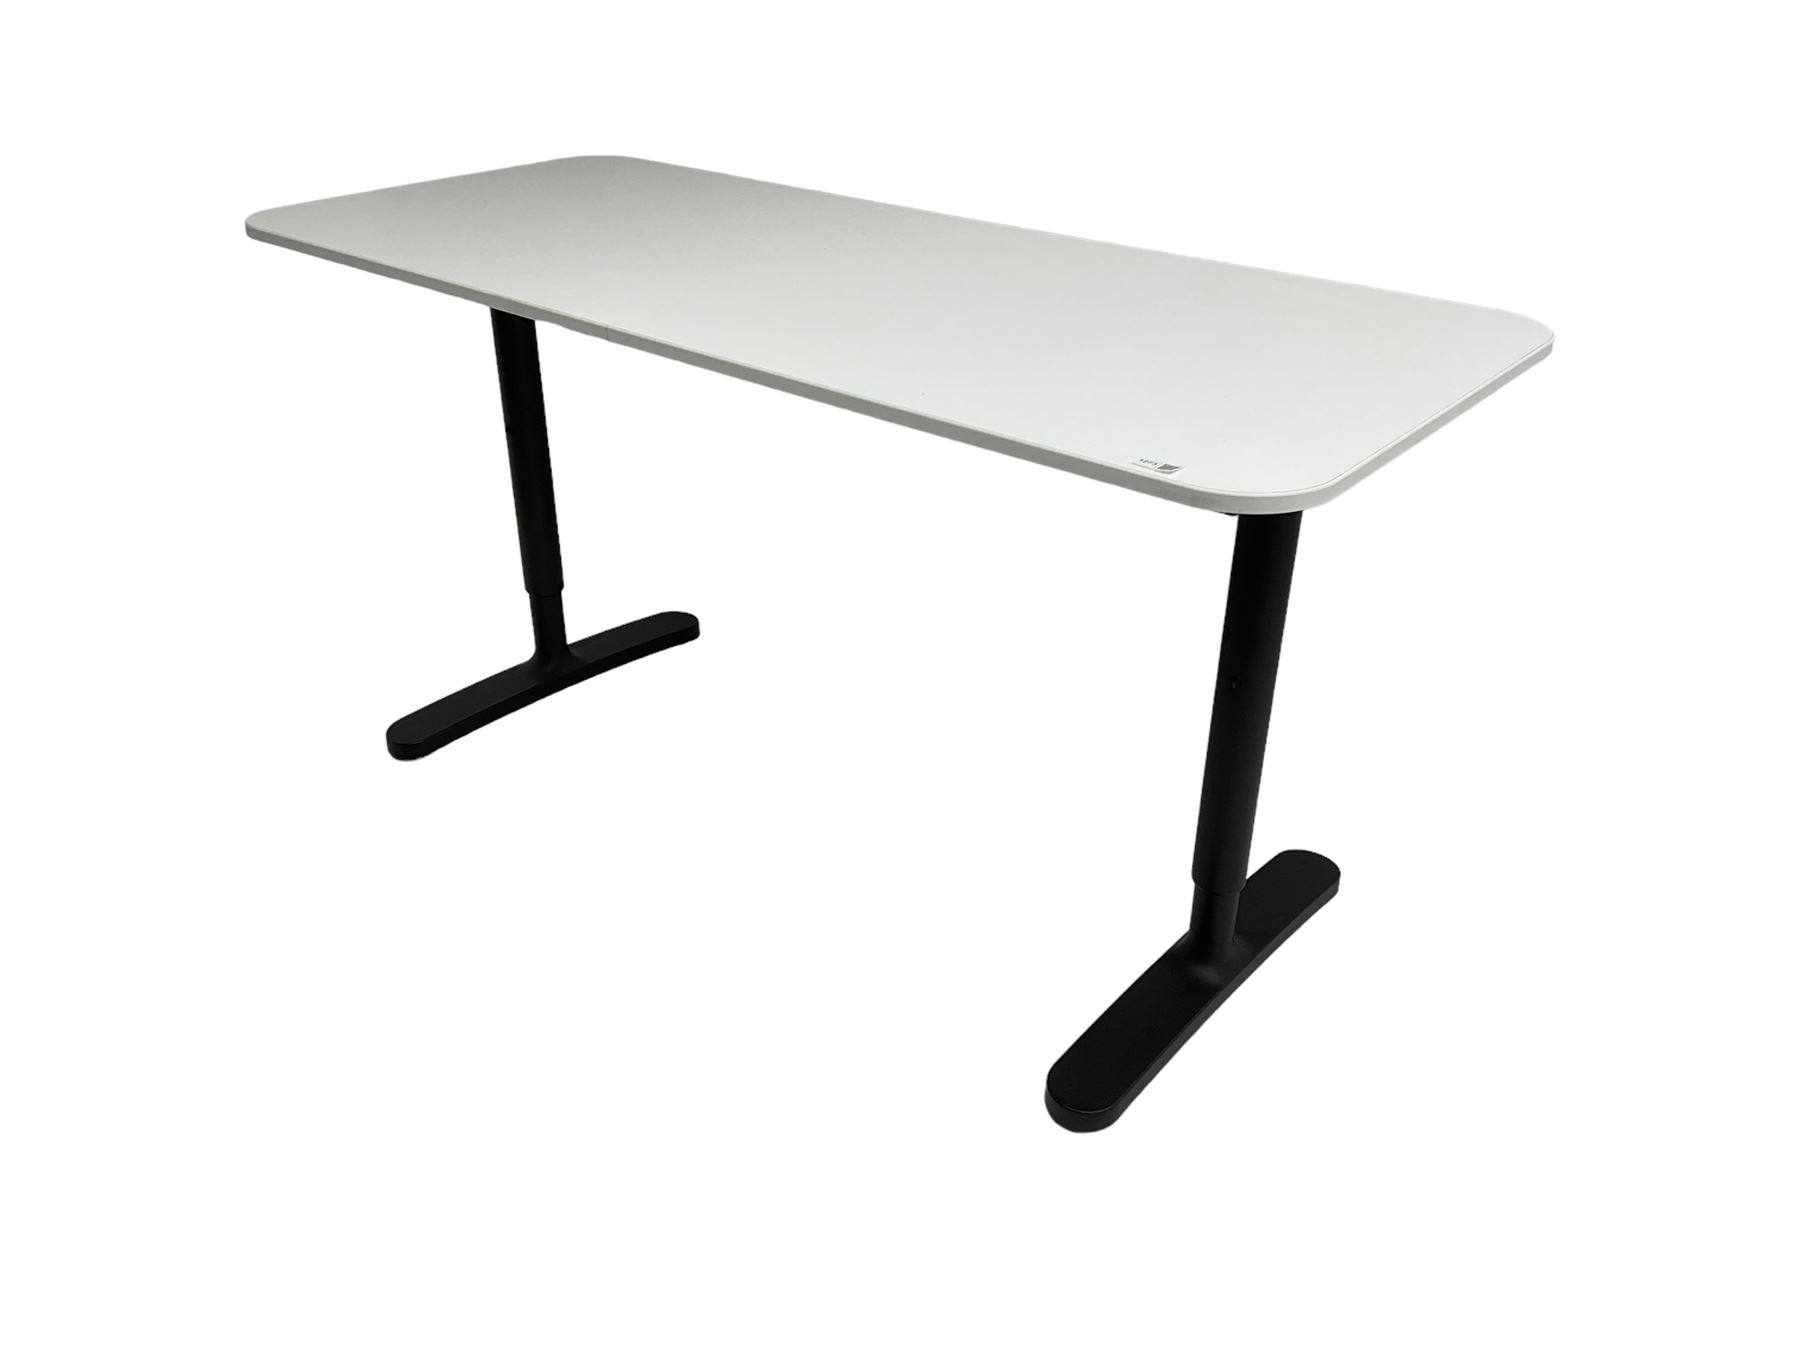 IKEA - contemporary table with white finish top - Image 4 of 6